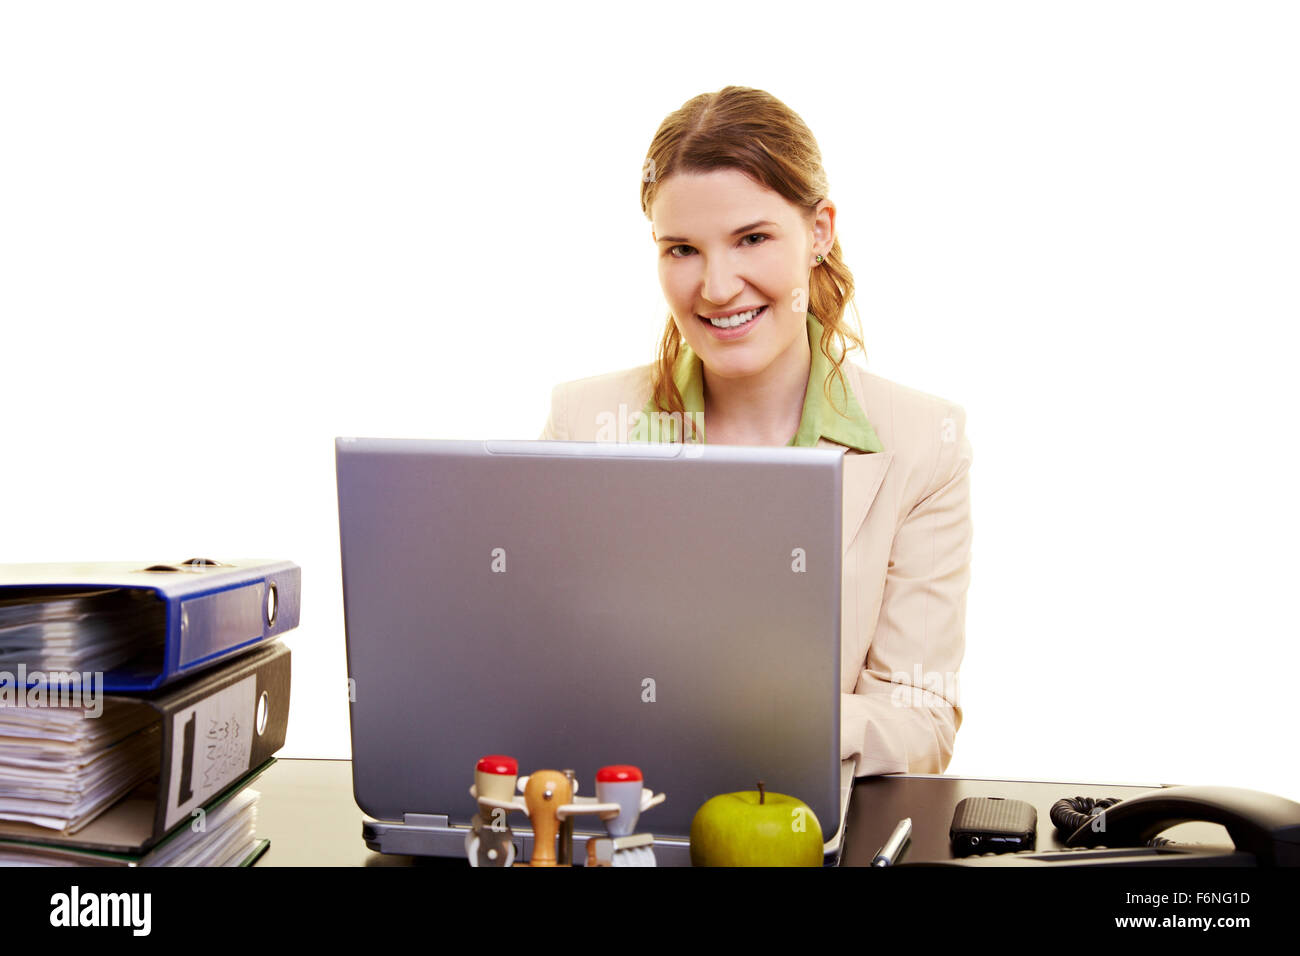 Smiling woman sitting at her desk with a laptop Stock Photo